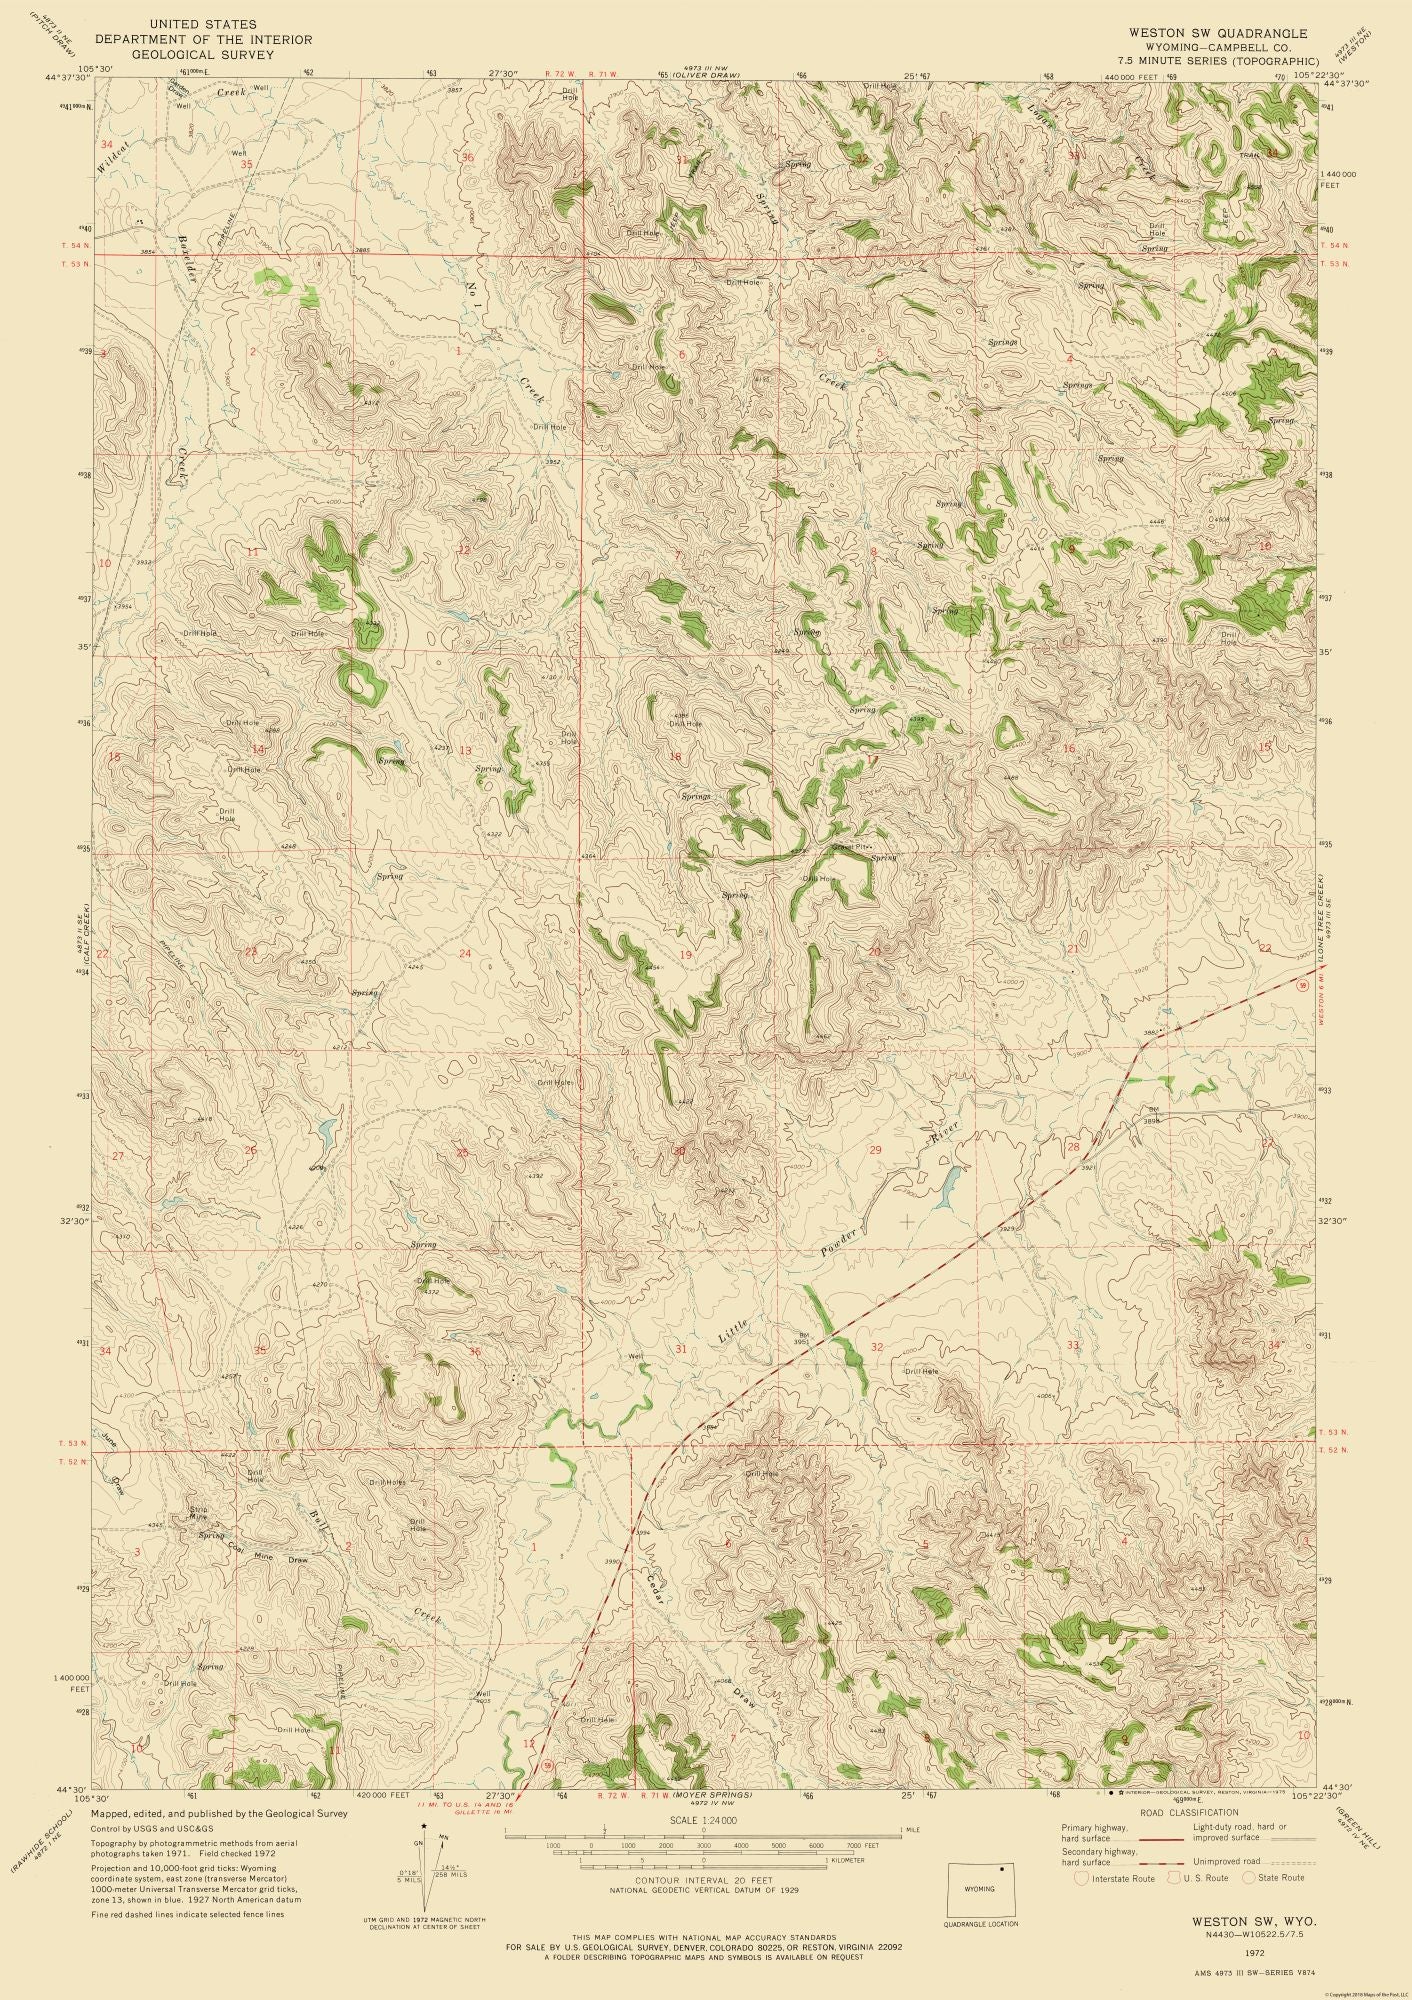 Topographical Map - South West Weston Wyoming Quad - USGS 1972 - 23 x 32.59 - Vintage Wall Art